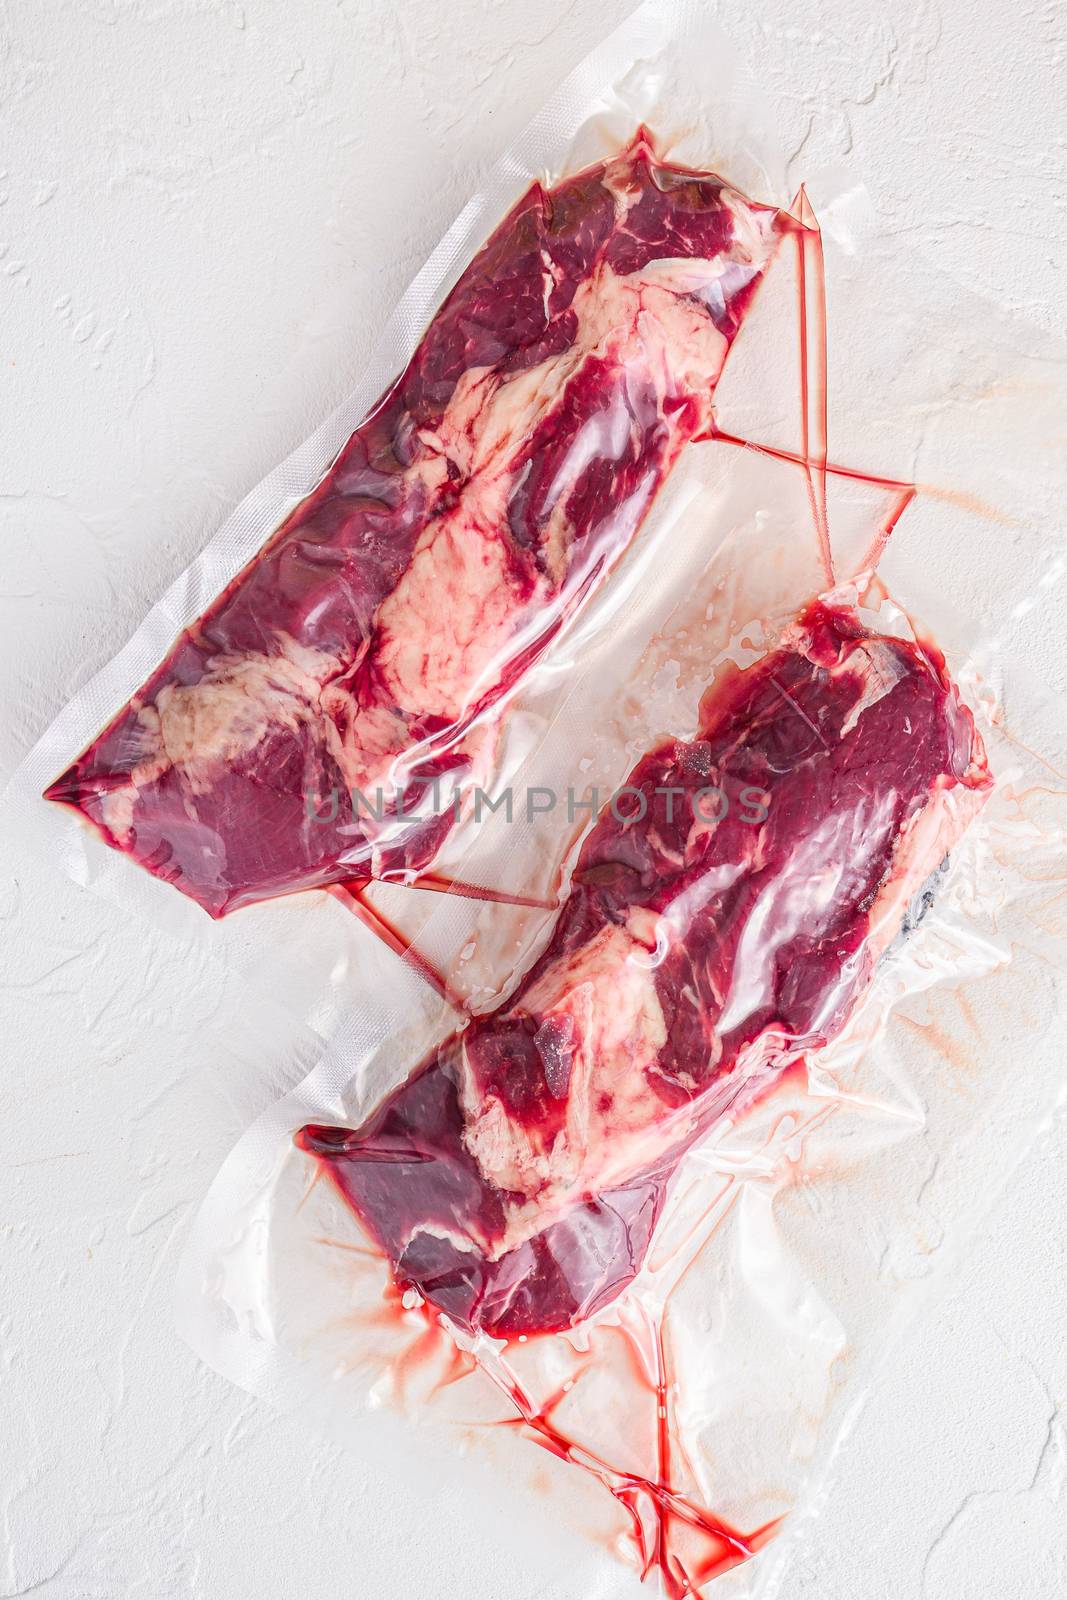 Pair of chuck roll beef steak, vacuum packed organic meat for sous vide cooking on white concrete textured background, top view. by Ilianesolenyi